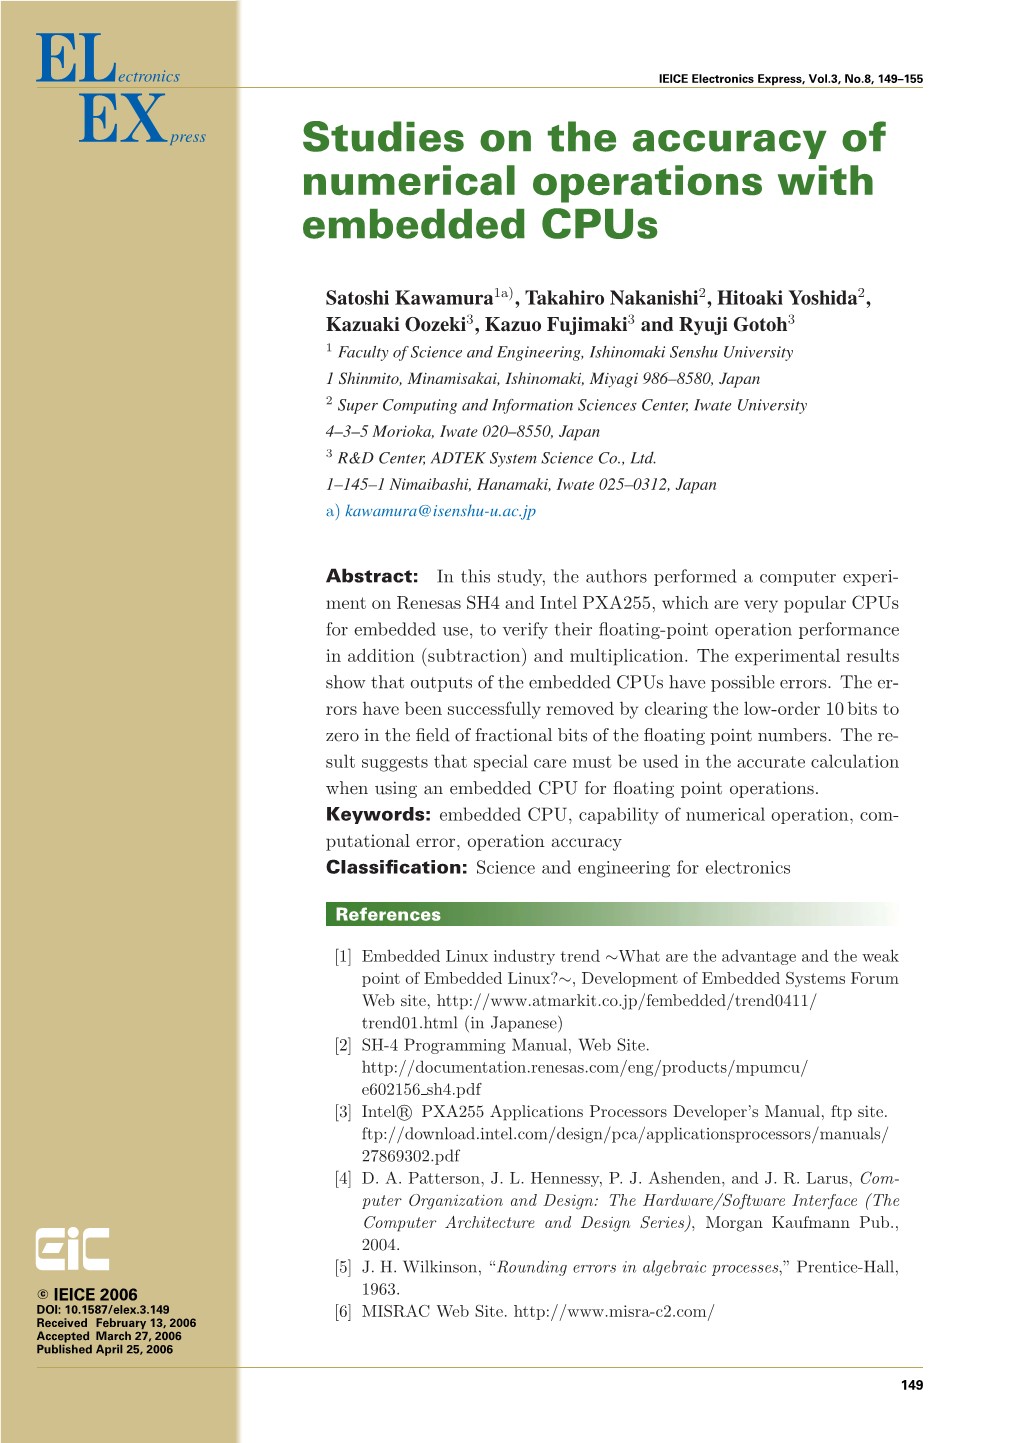 Studies on the Accuracy of Numerical Operations with Embedded Cpus